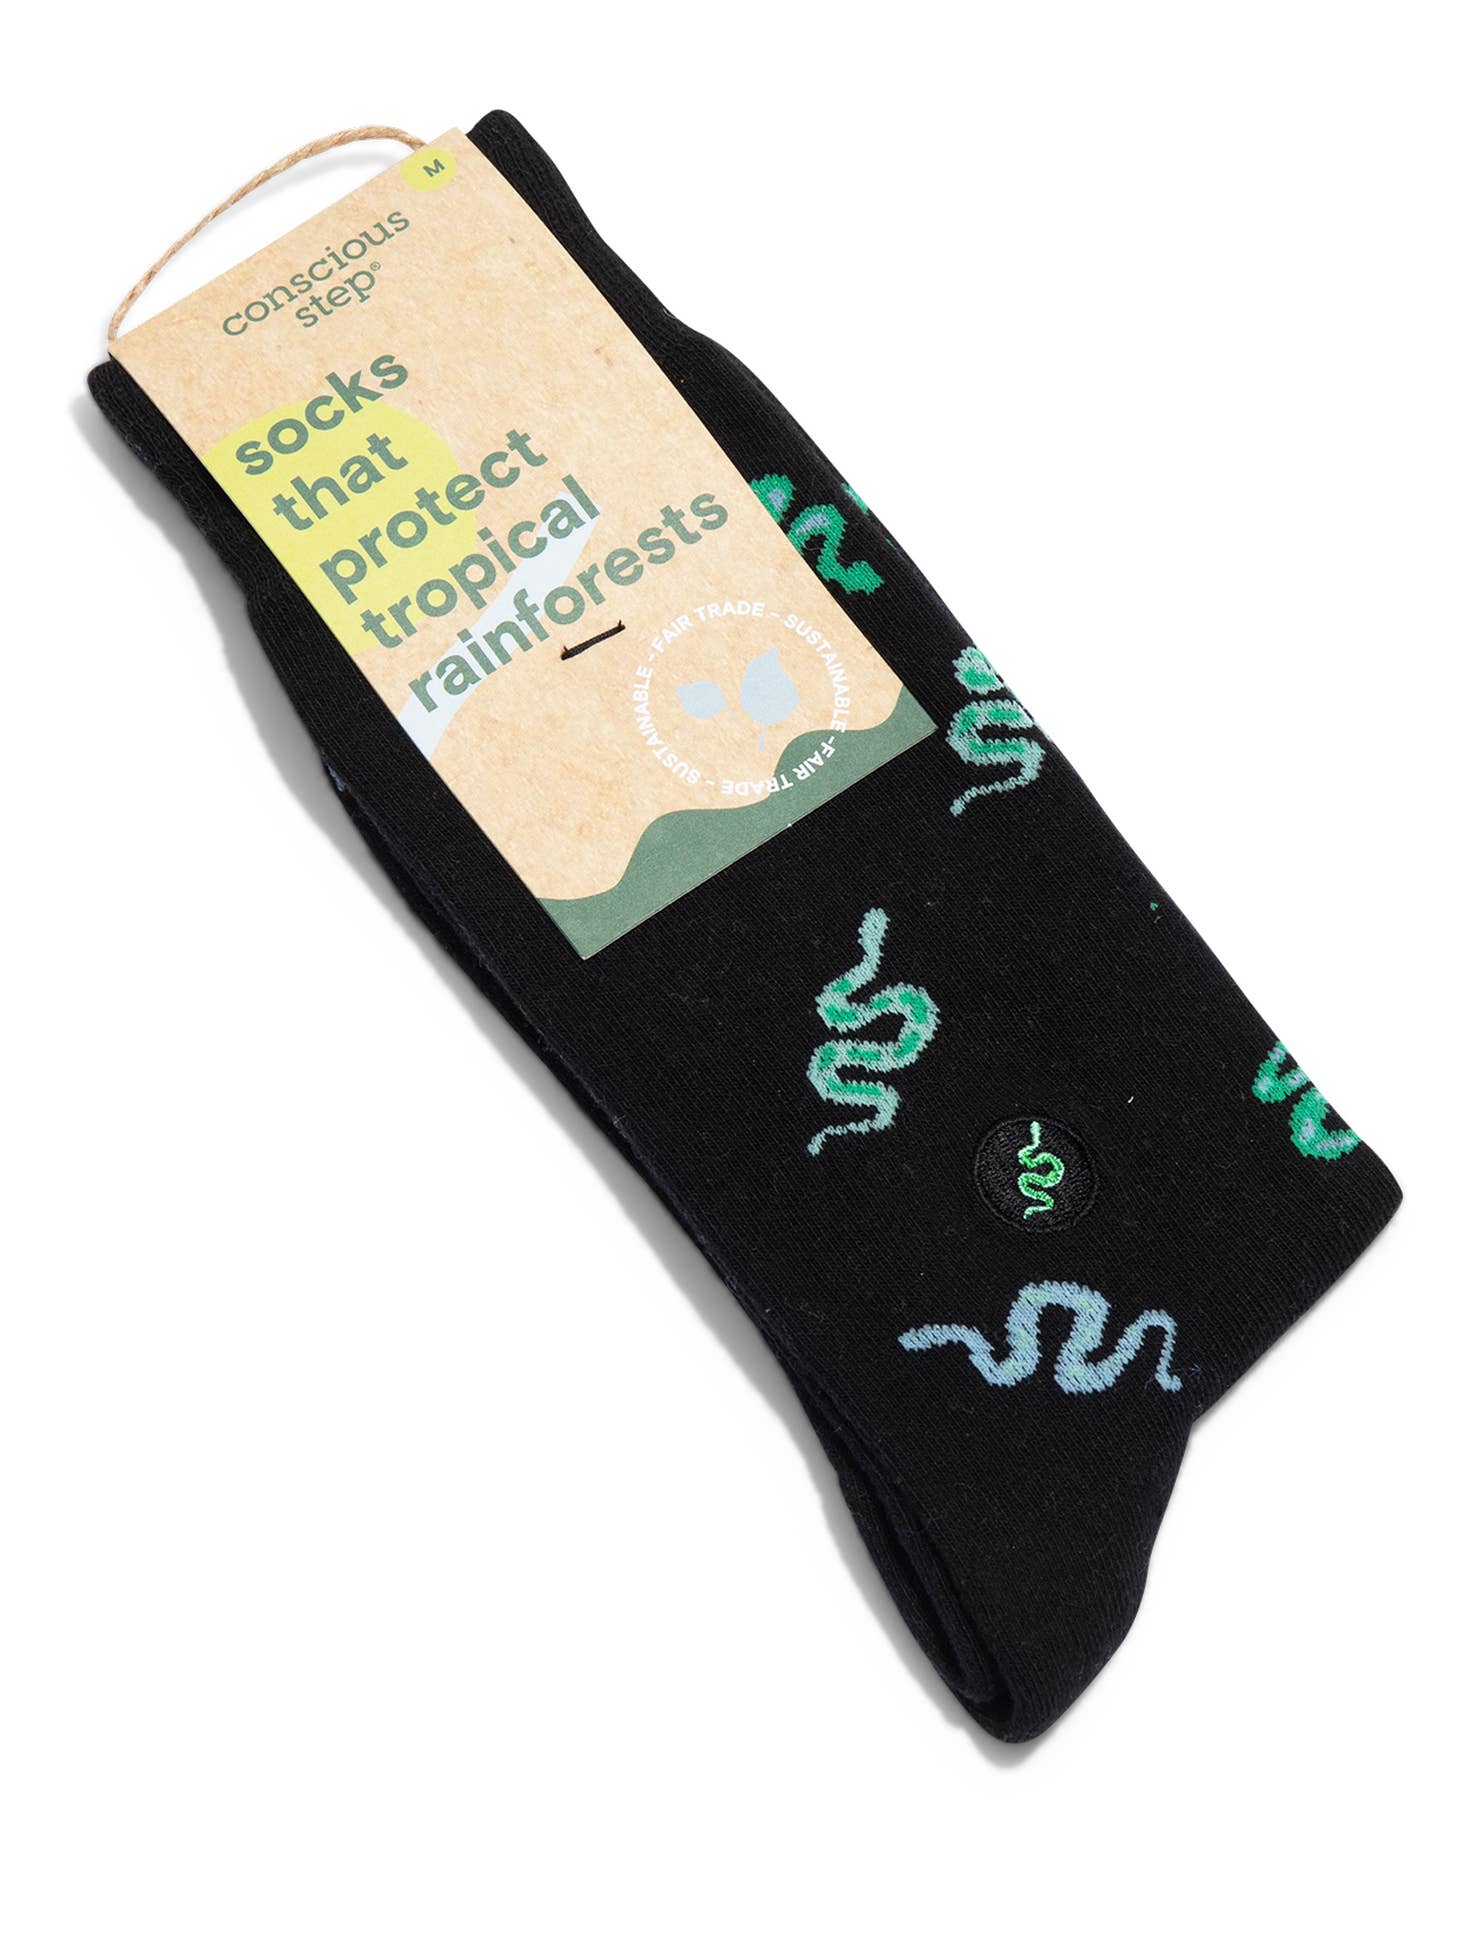 Slithering Snakes Socks that protect tropical rainforests